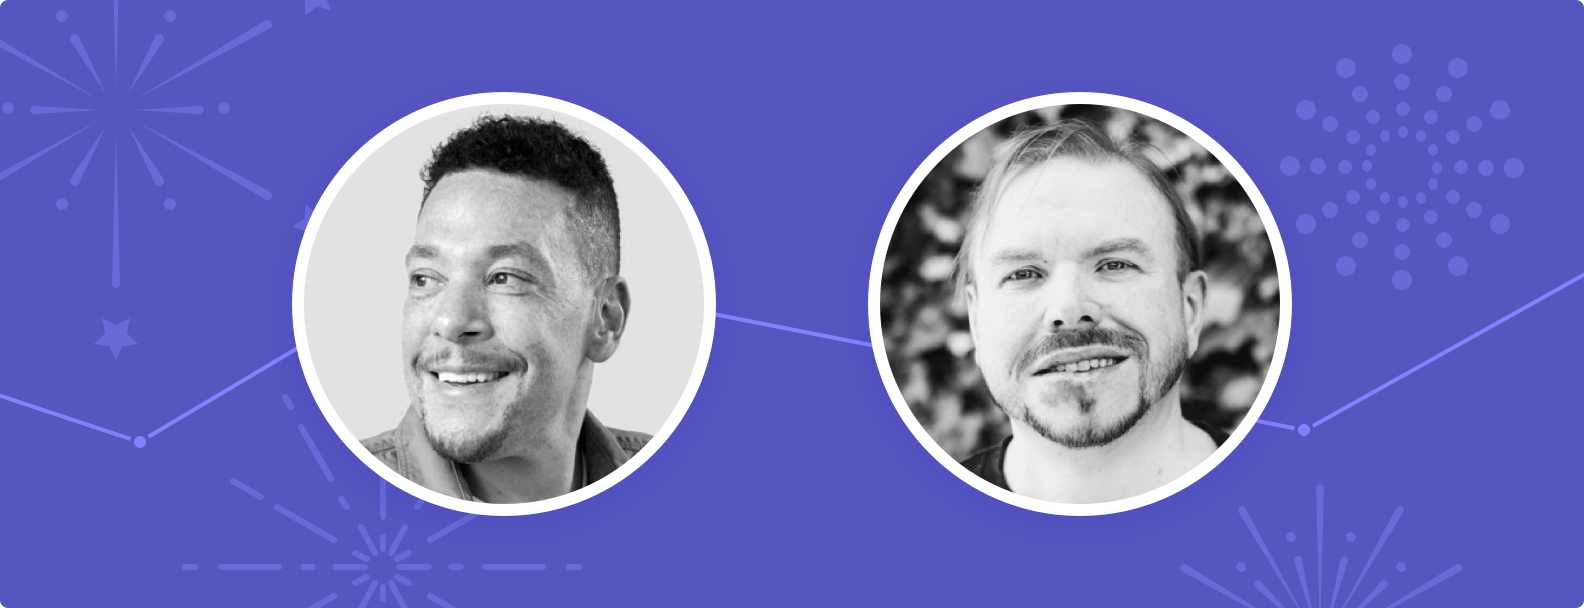 Welcoming Drew Daniels, CISO, and Cory Thomas, VP of Engineering